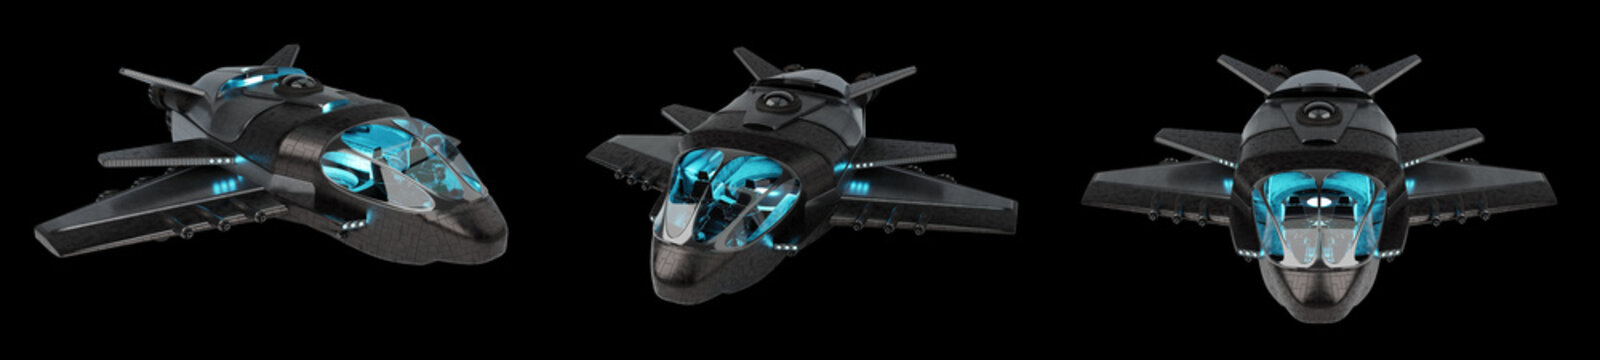 Futuristic spacecraft collection isolated on black background 3D rendering